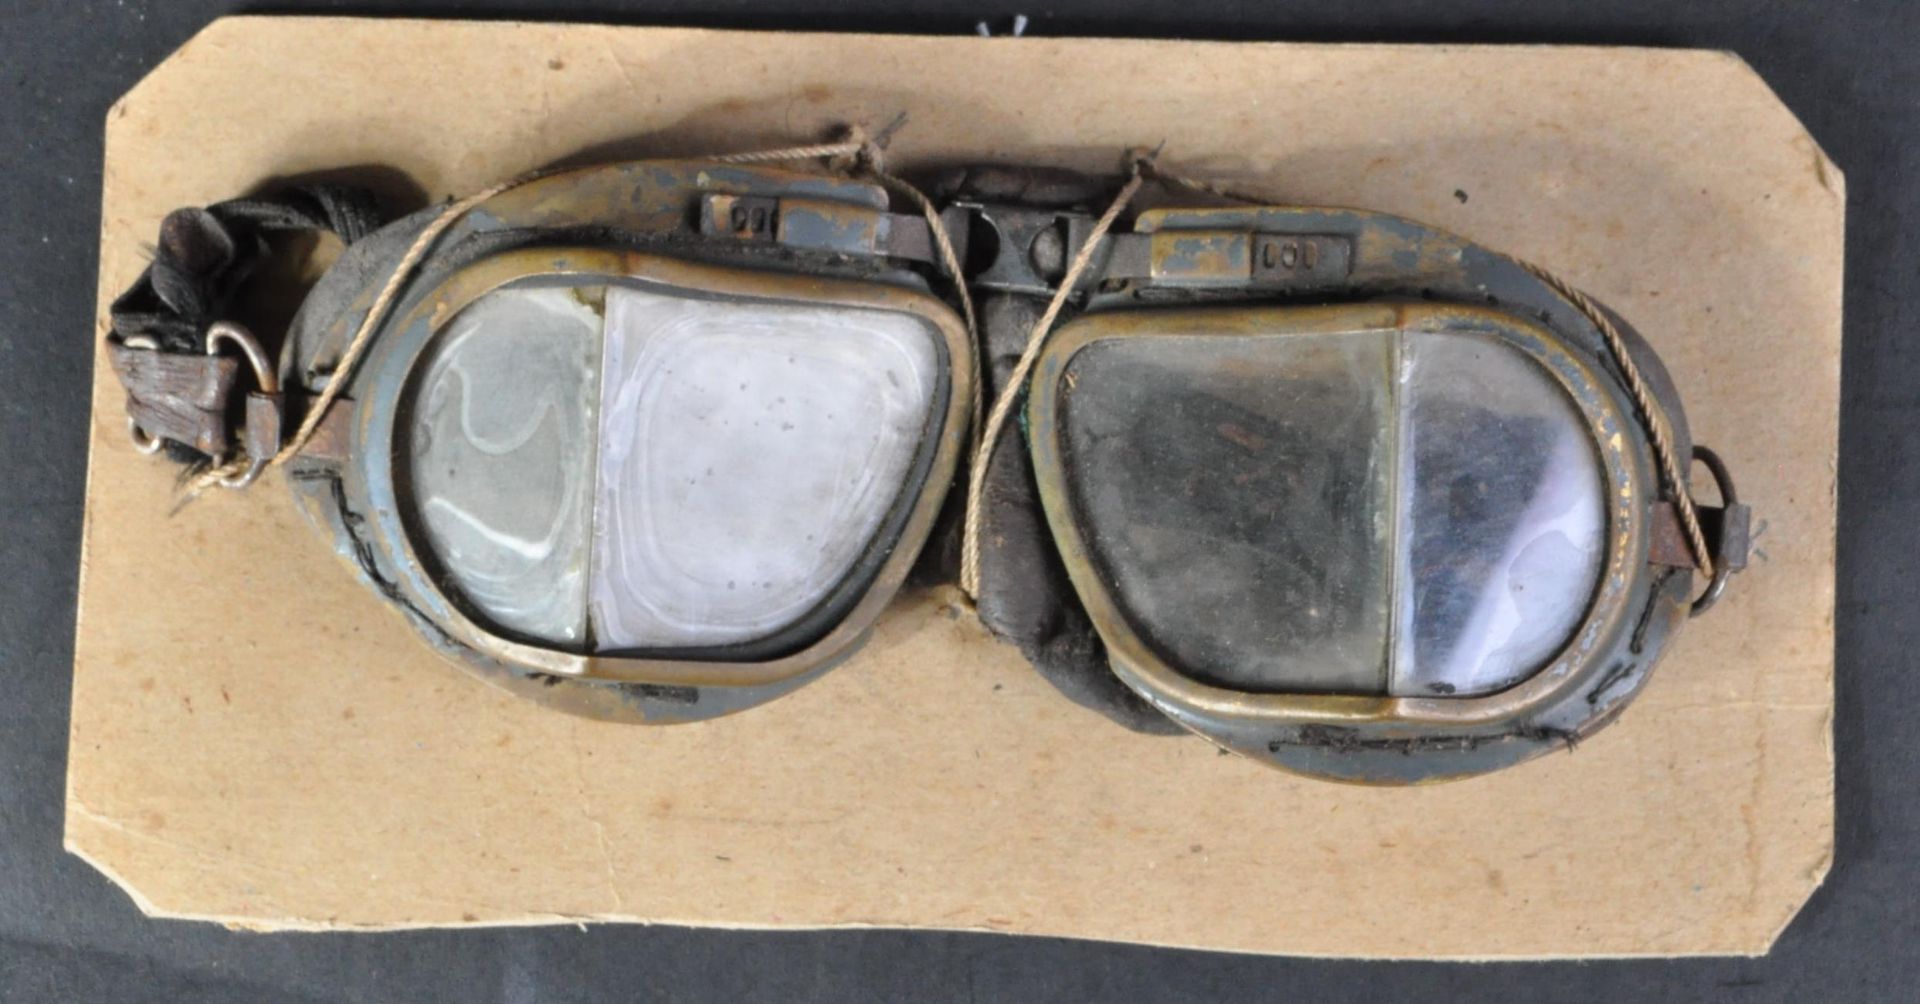 DAMBUSTERS / 617 SQN - PAIR OF FLYING GOGGLES FROM WRECKAGE - Image 3 of 6